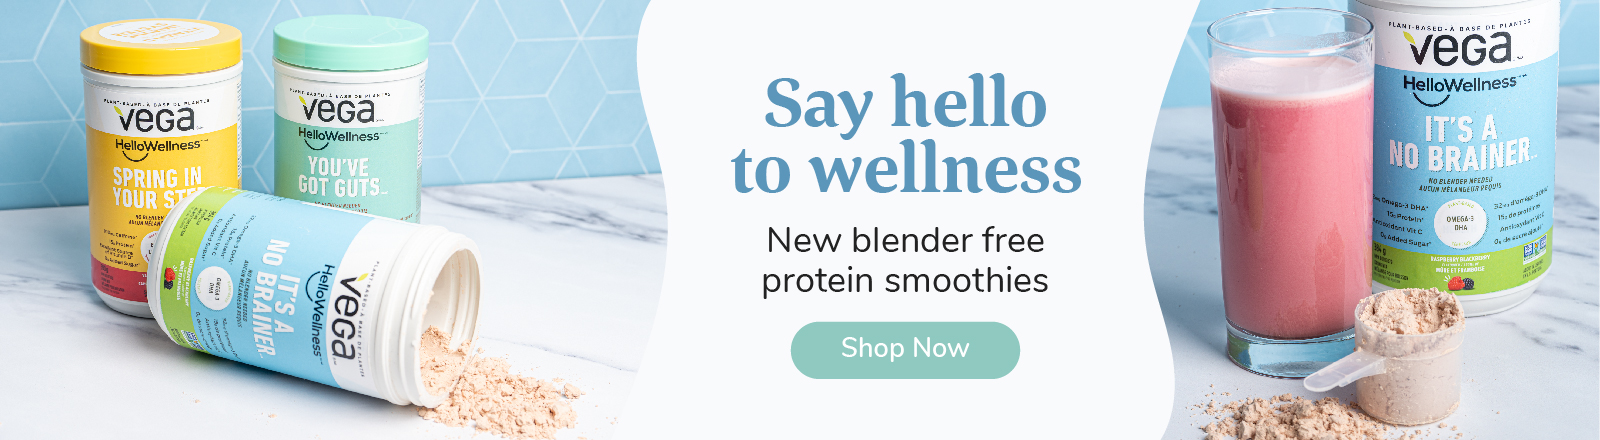 Say hello to wellness. New blender free protein smoothies.